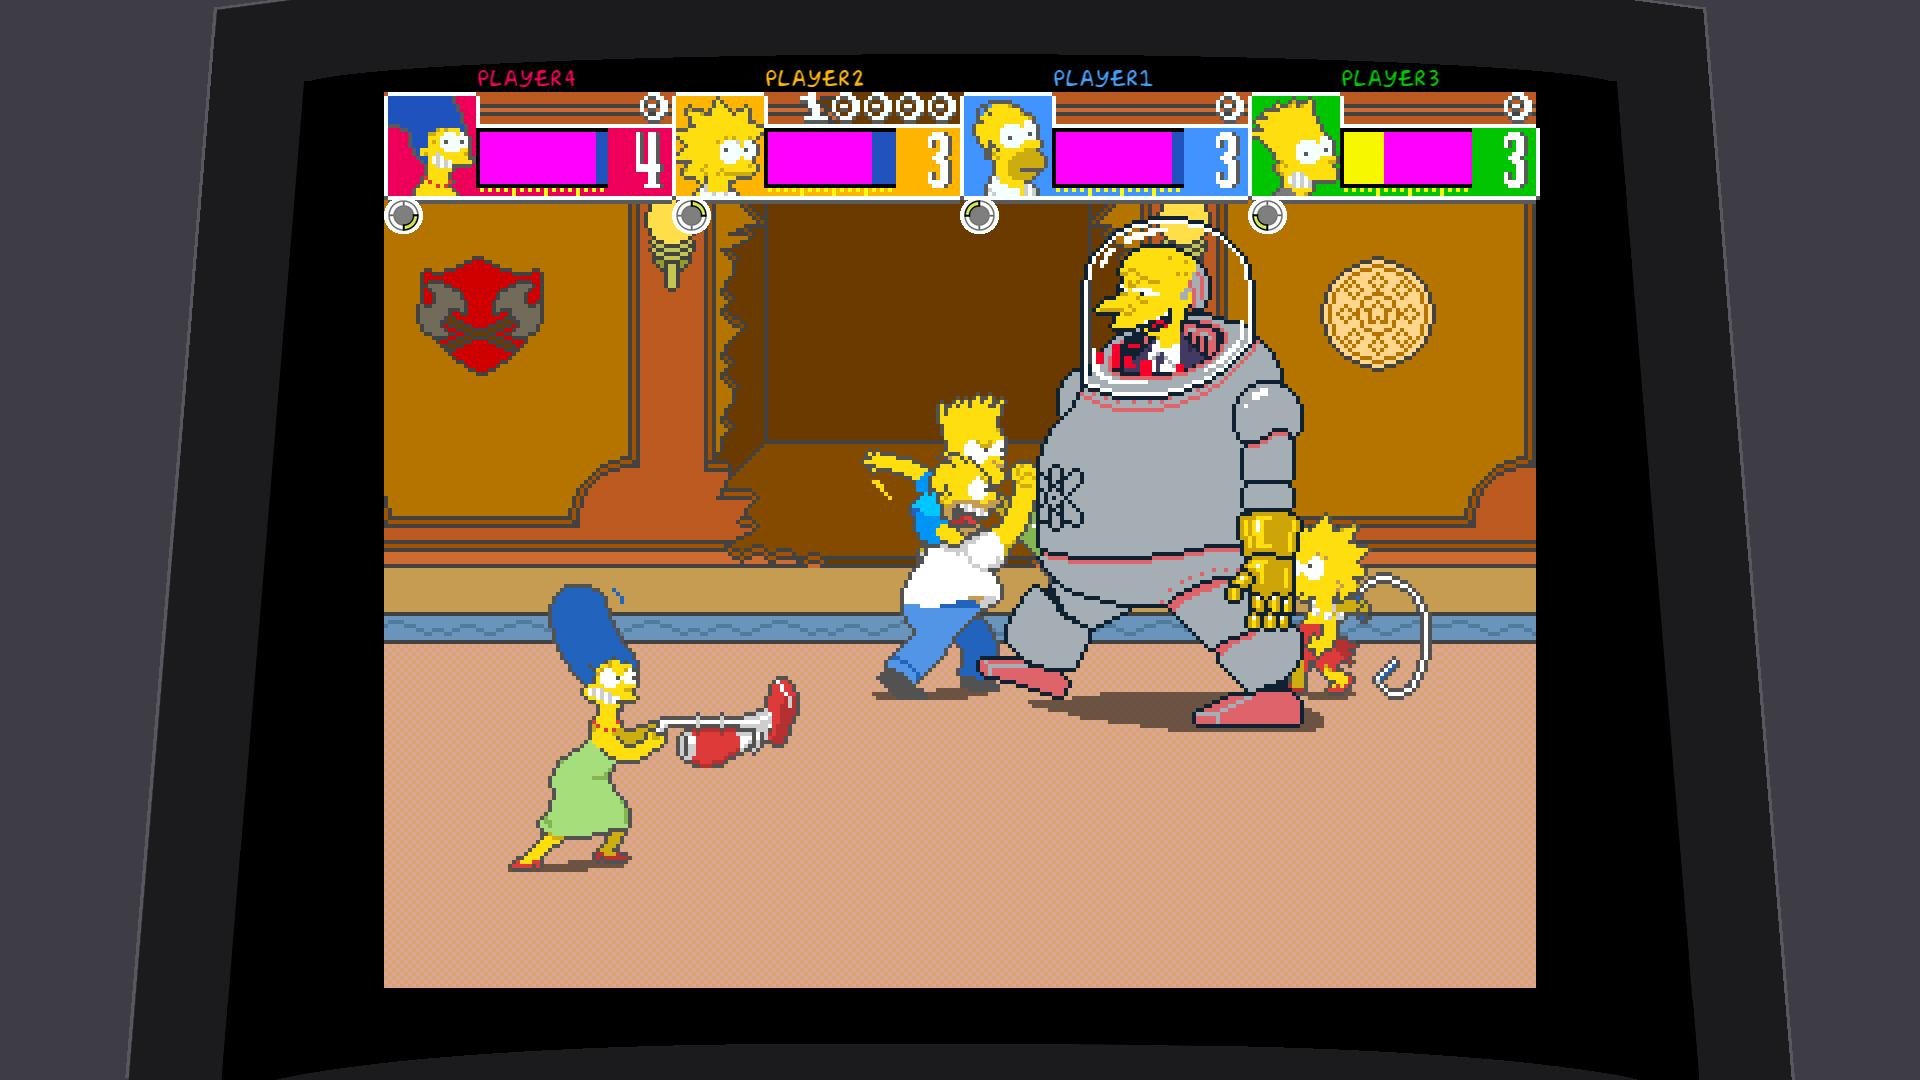 the simpsons the arcade game pc